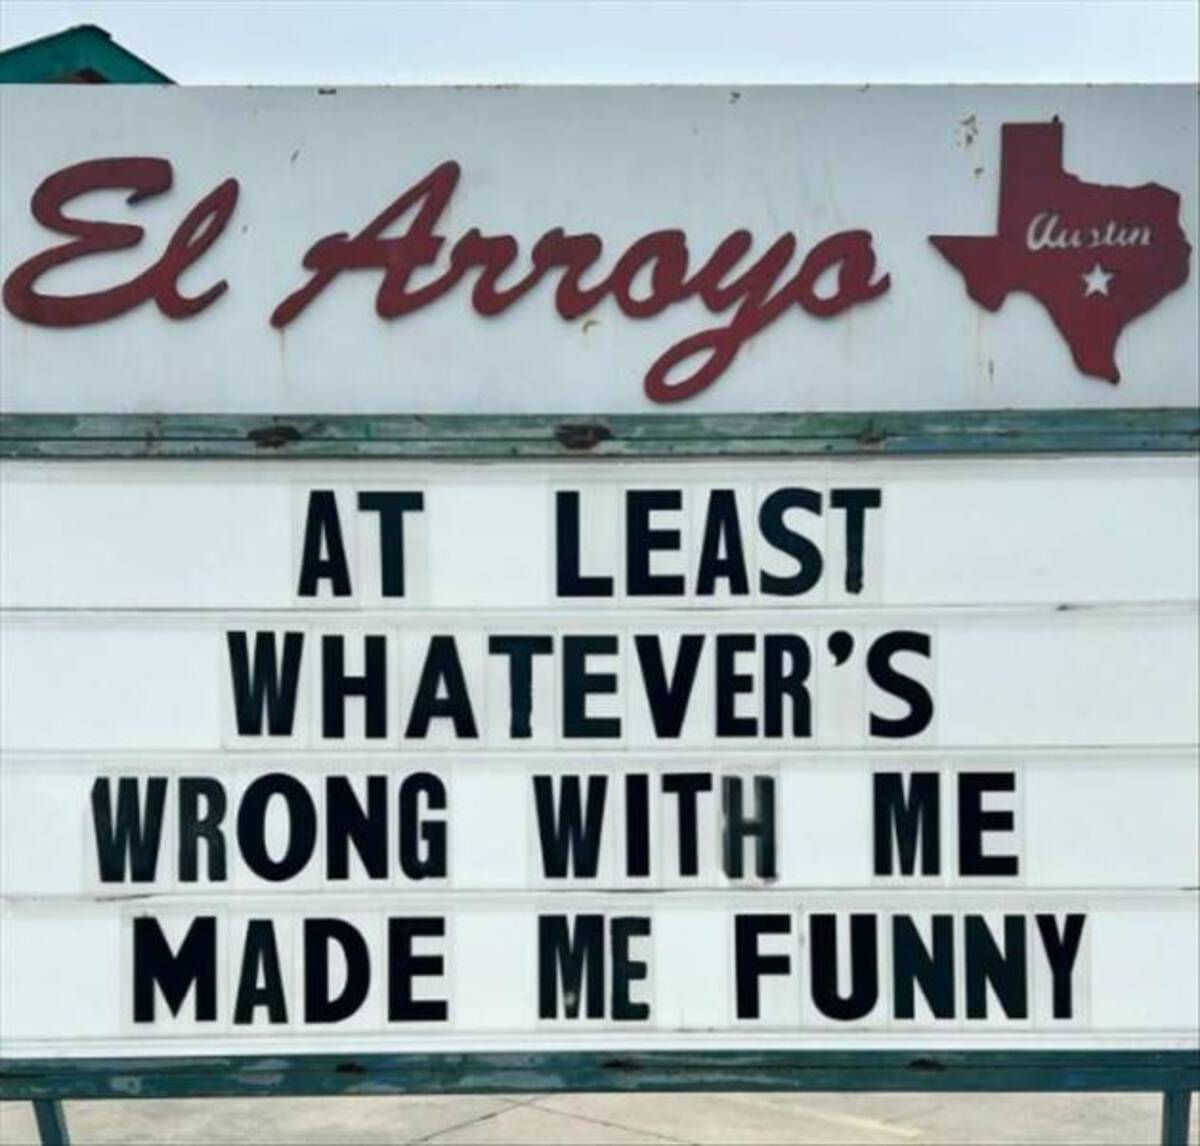 street sign - El Arroyo At Least Whatever'S Austin Wrong With Me Made Me Funny